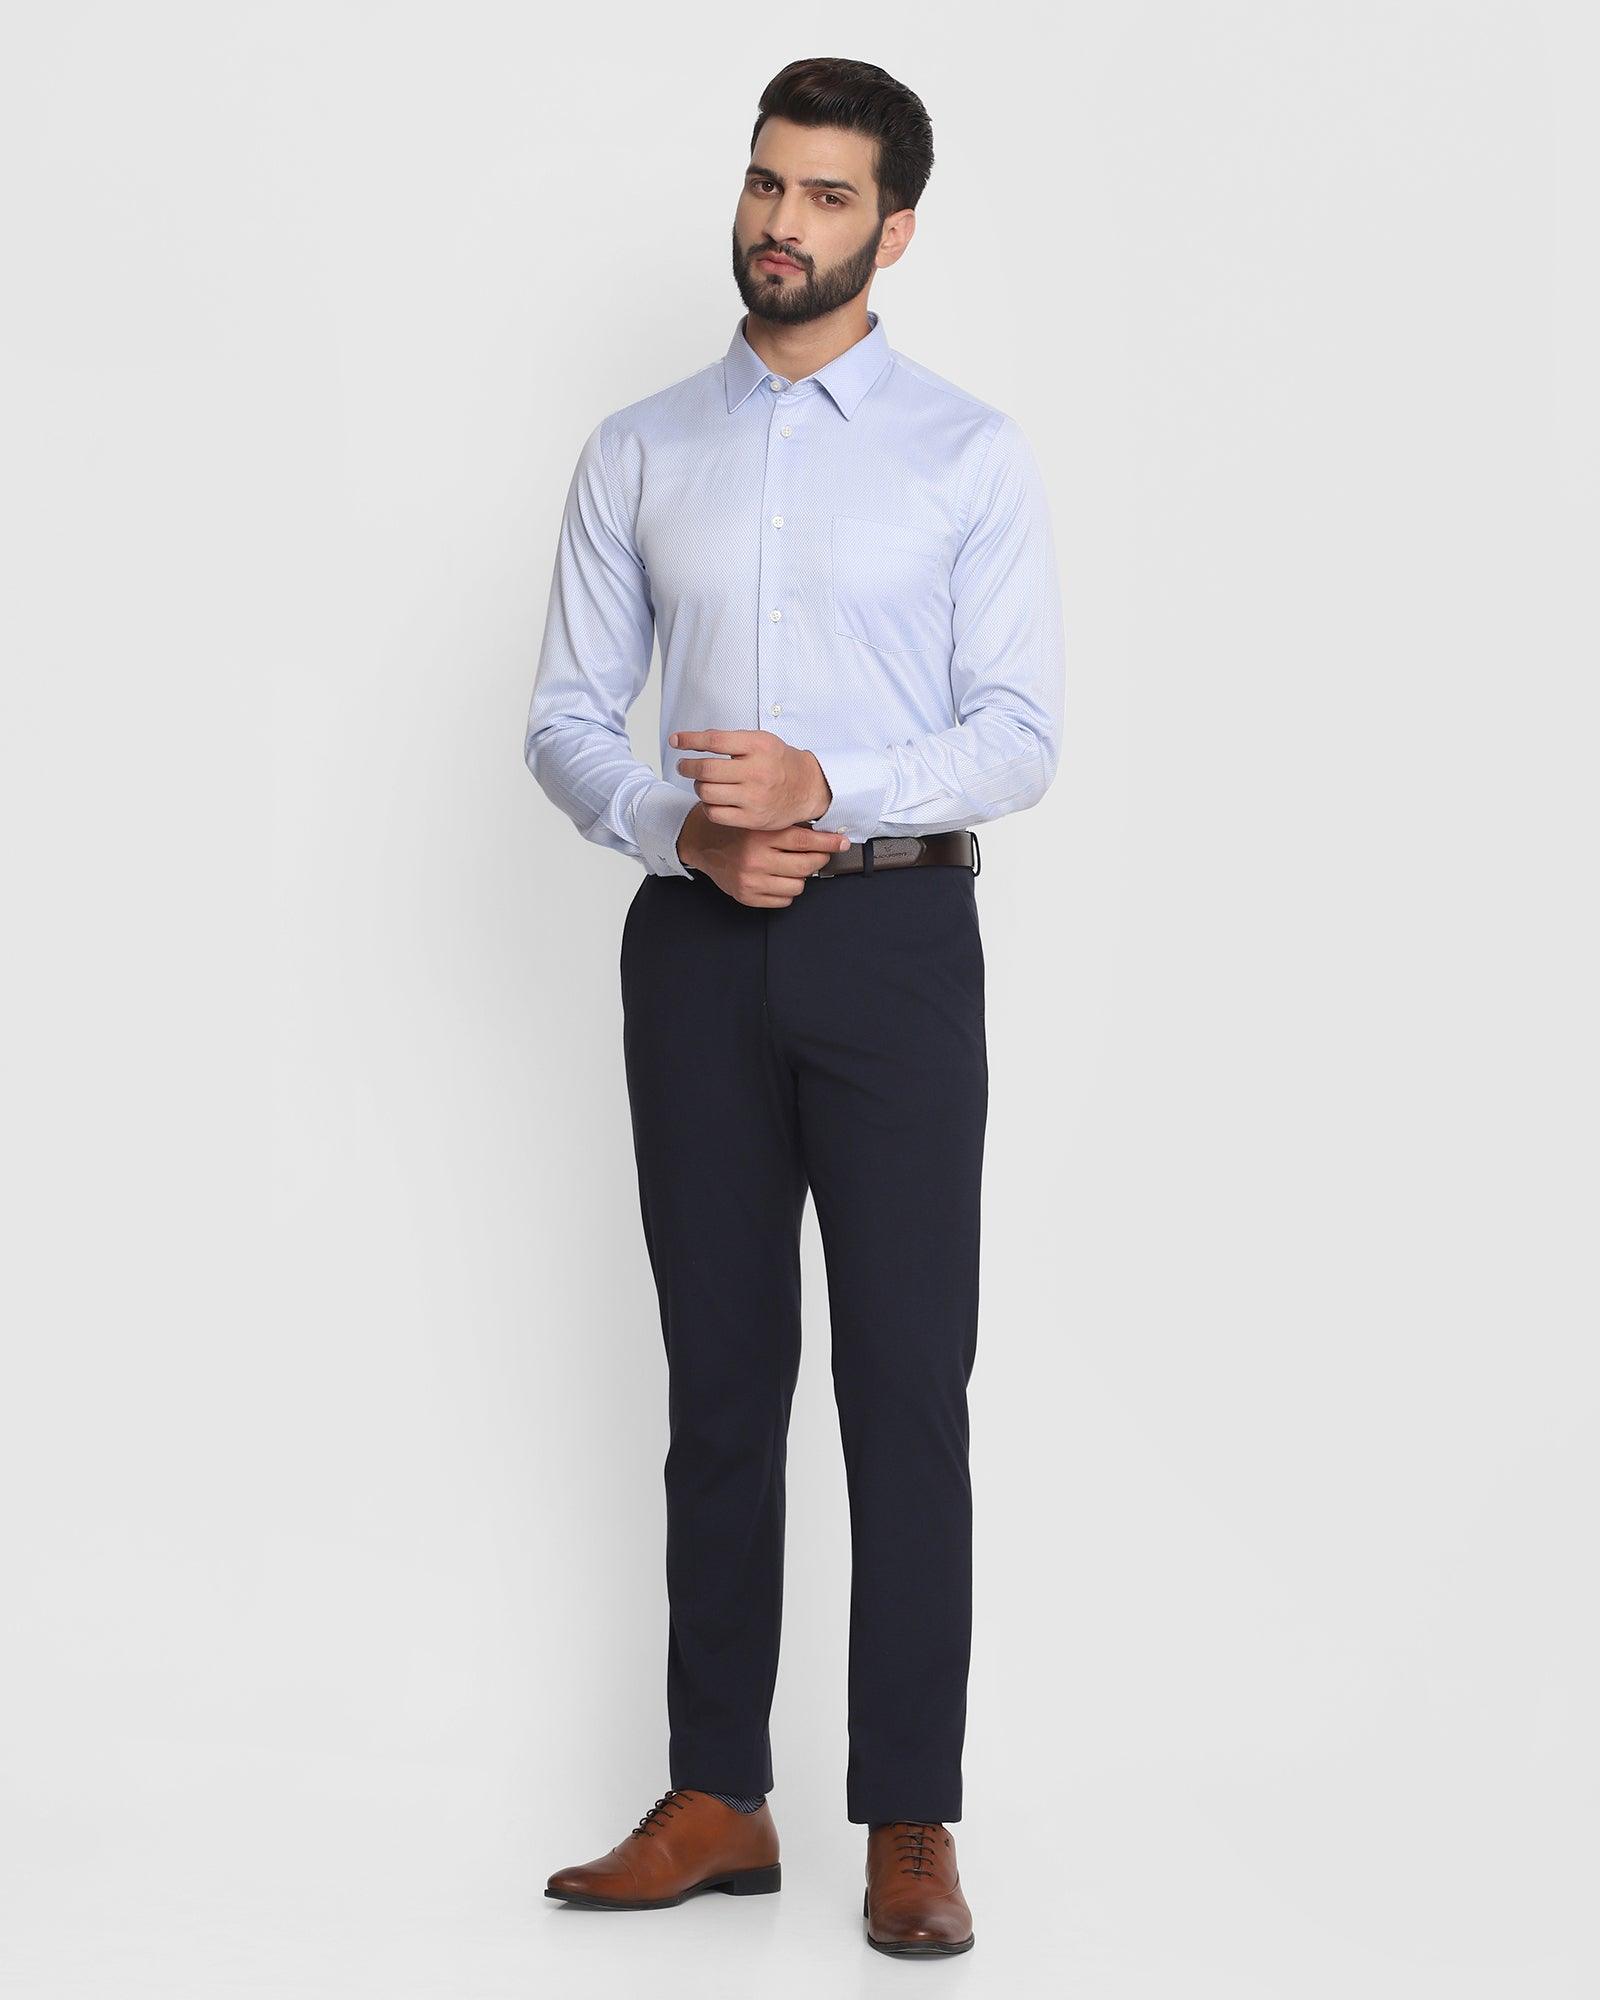 Polyester Sky Blue shirt & Navy Trouser Men Corporate Office Uniform at Rs  550/piece in New Delhi